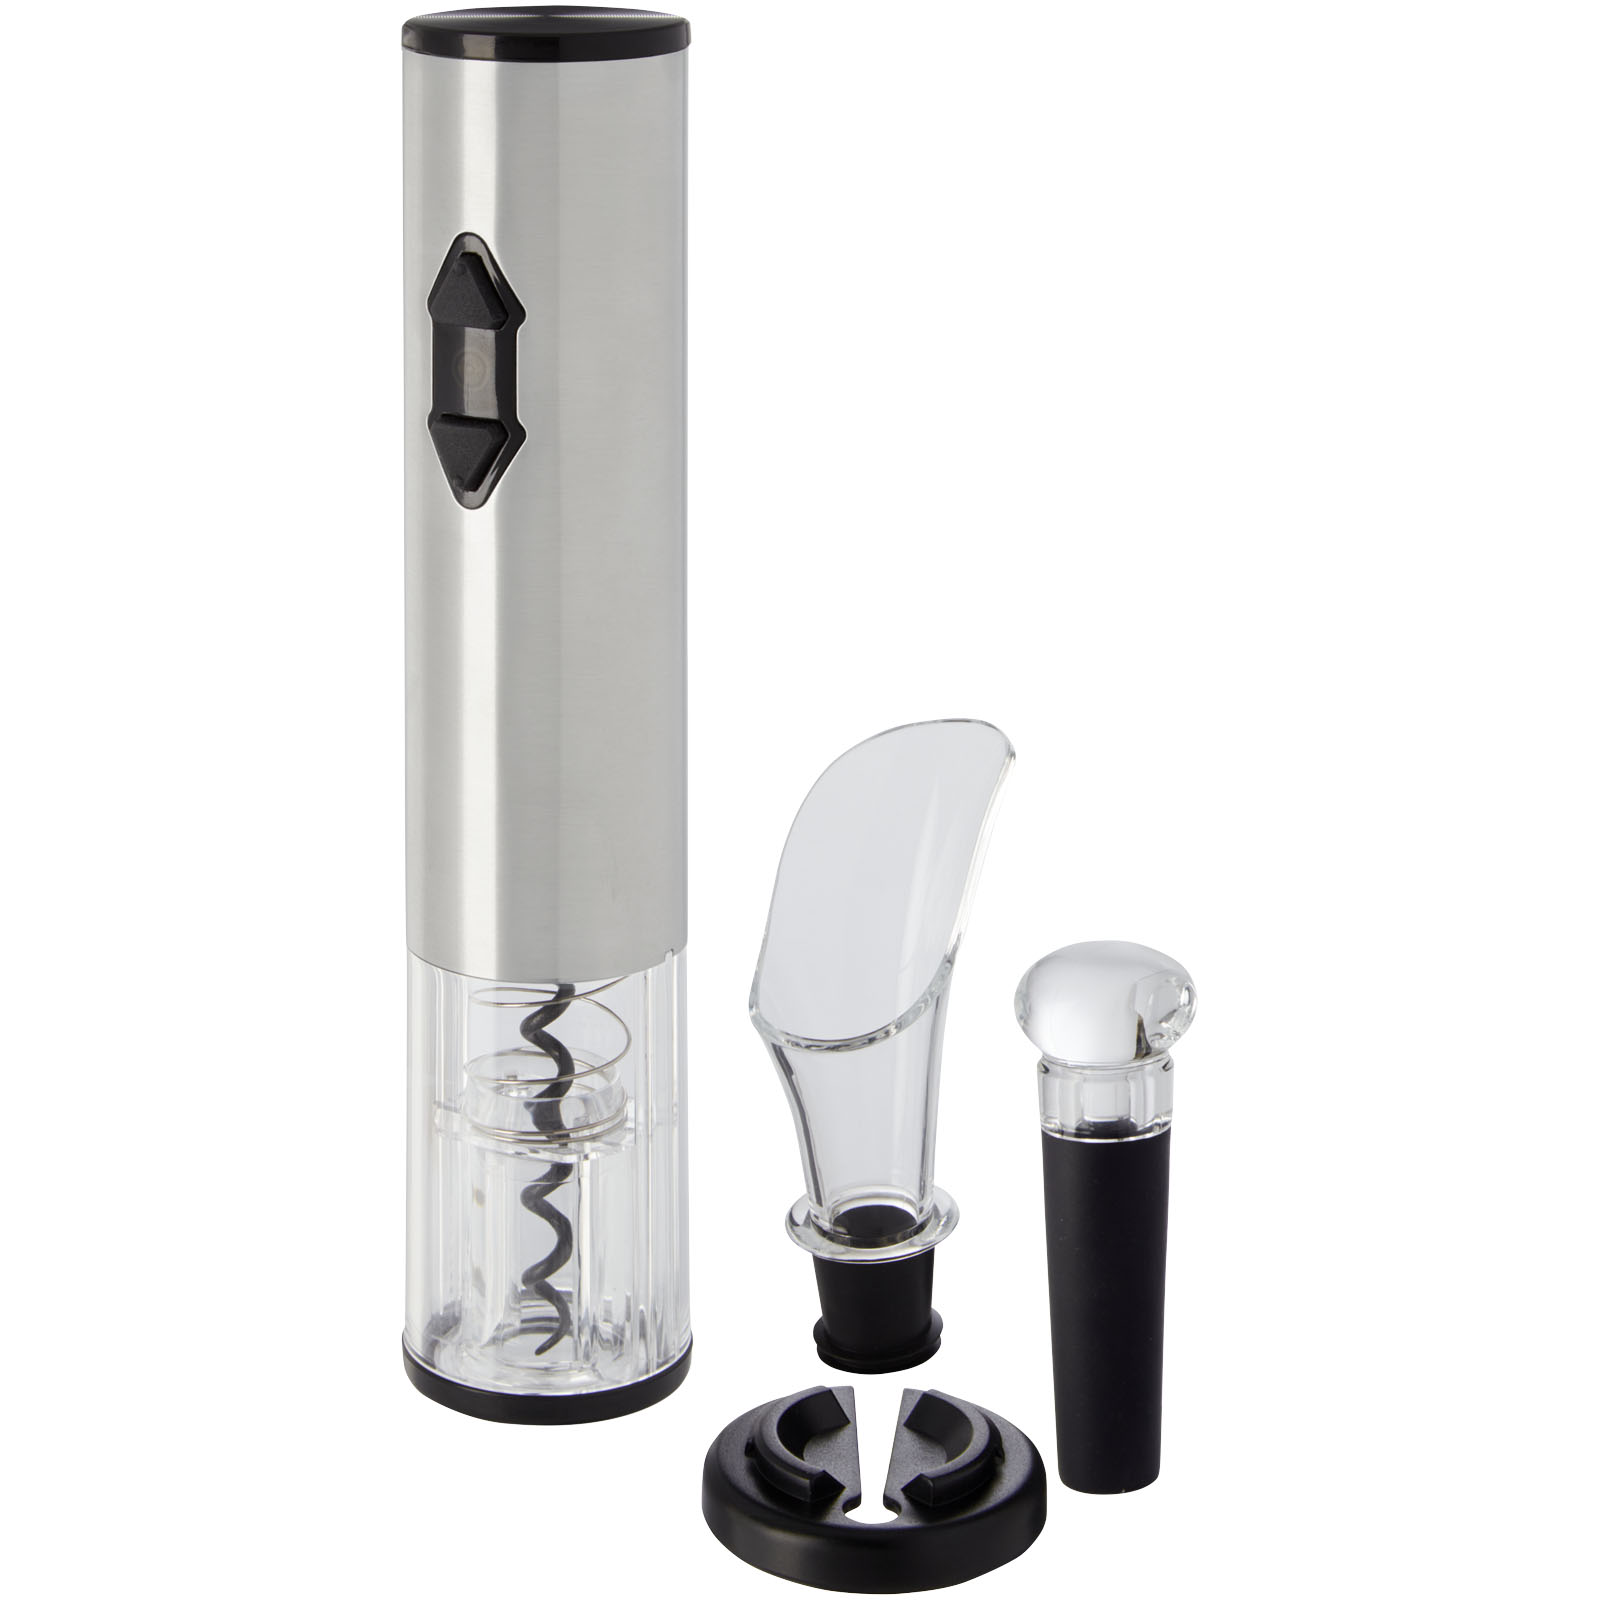 Advertising Wine Accessories - Pino electric wine opener with wine tools